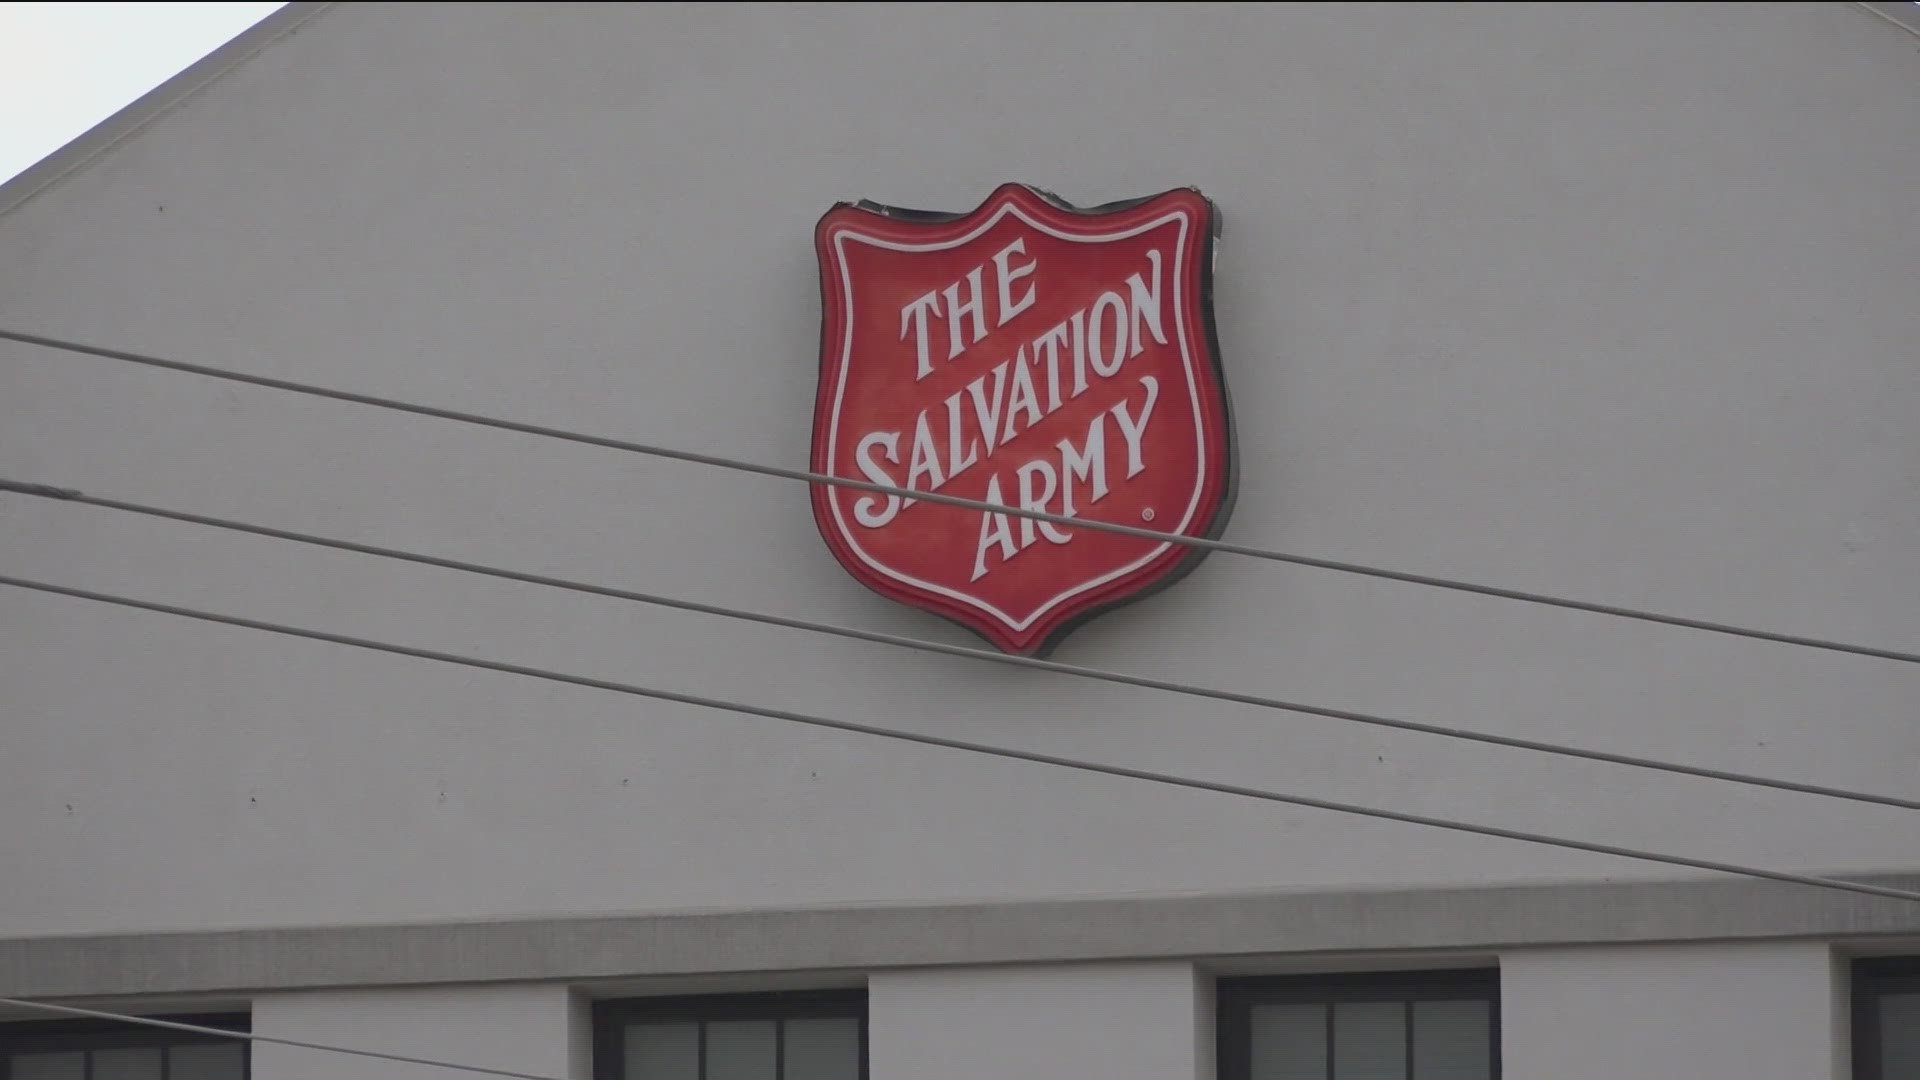 With the closure imminent, the Salvation Army is looking to find a location to place all those that have been utilizing their services.